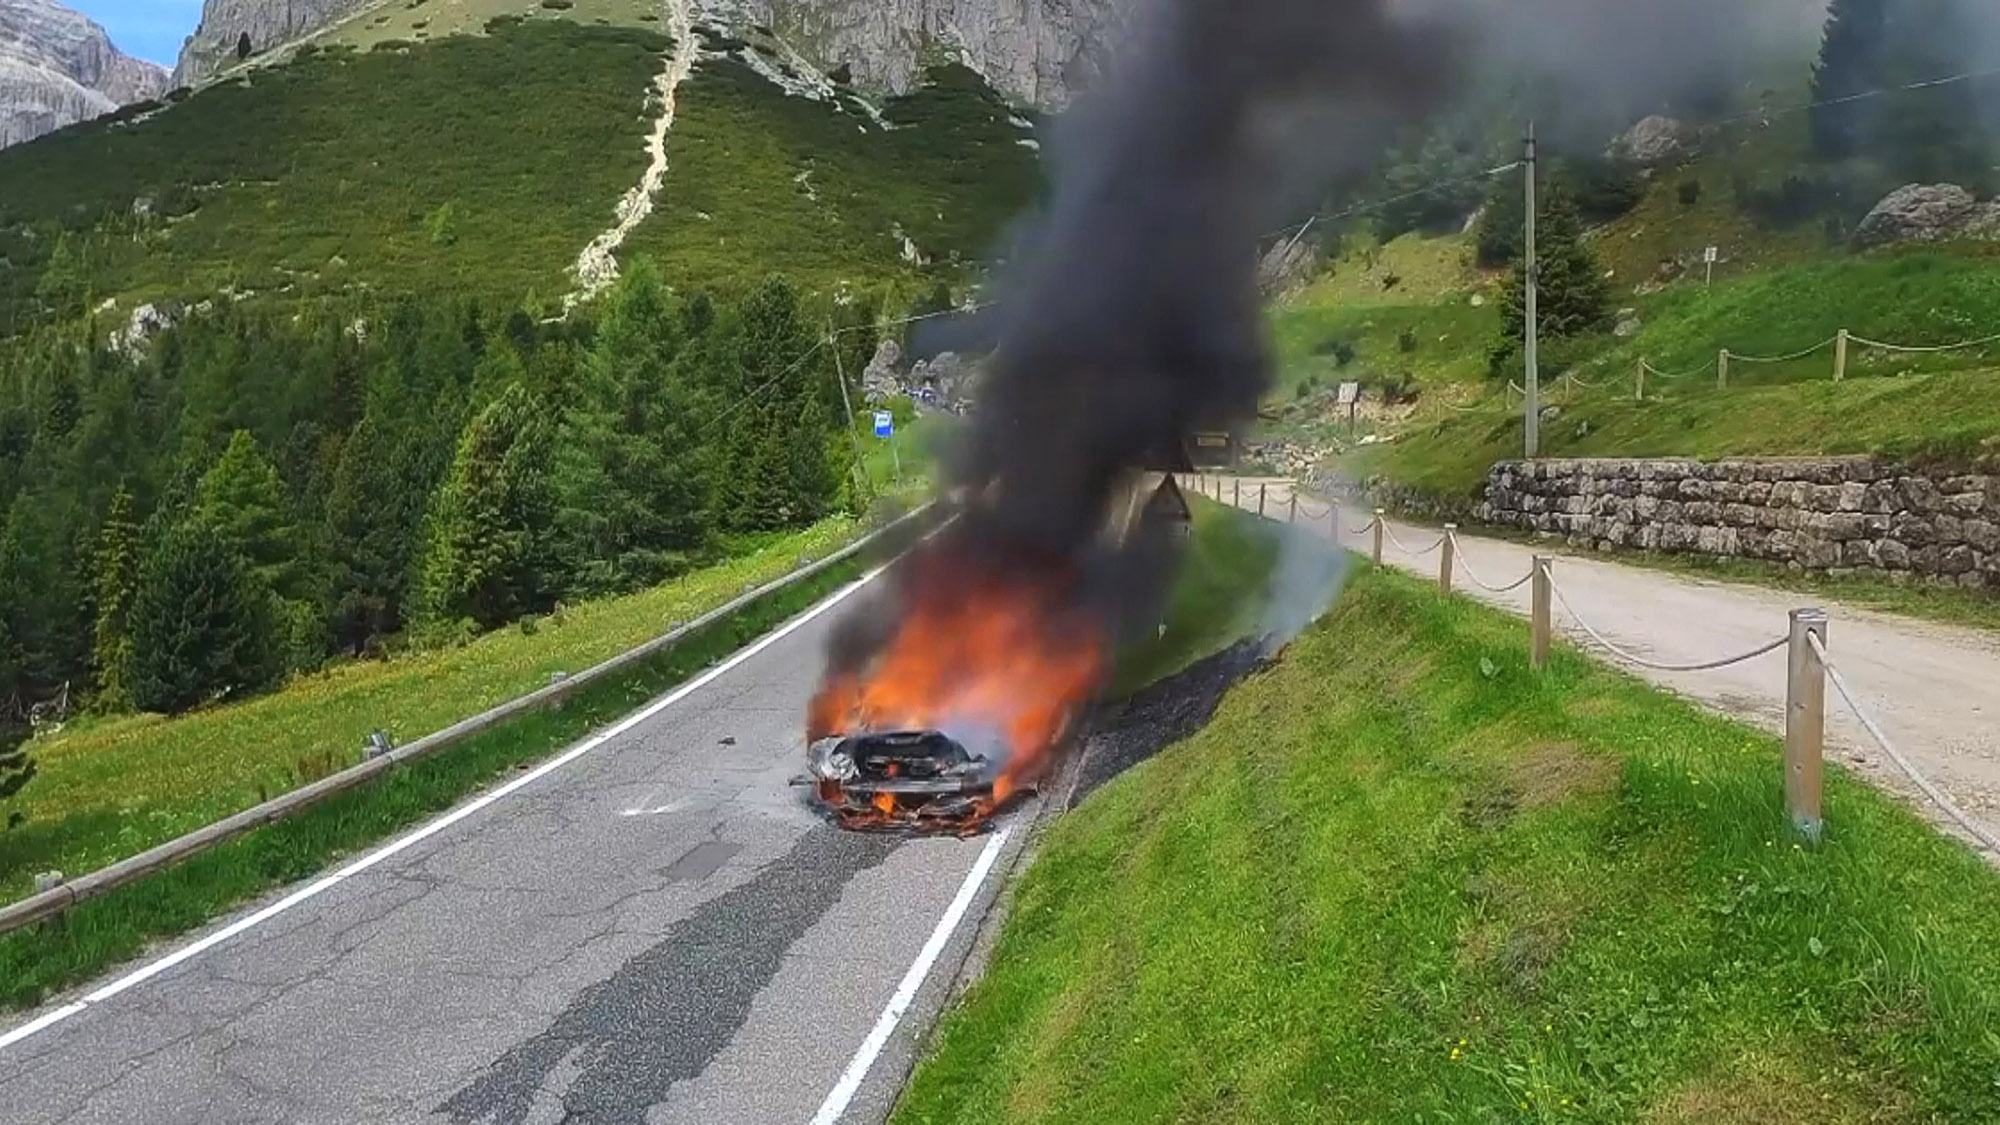 Read more about the article Luxury McLaren Supercar Burns To Crisp On Italian Mountain Road